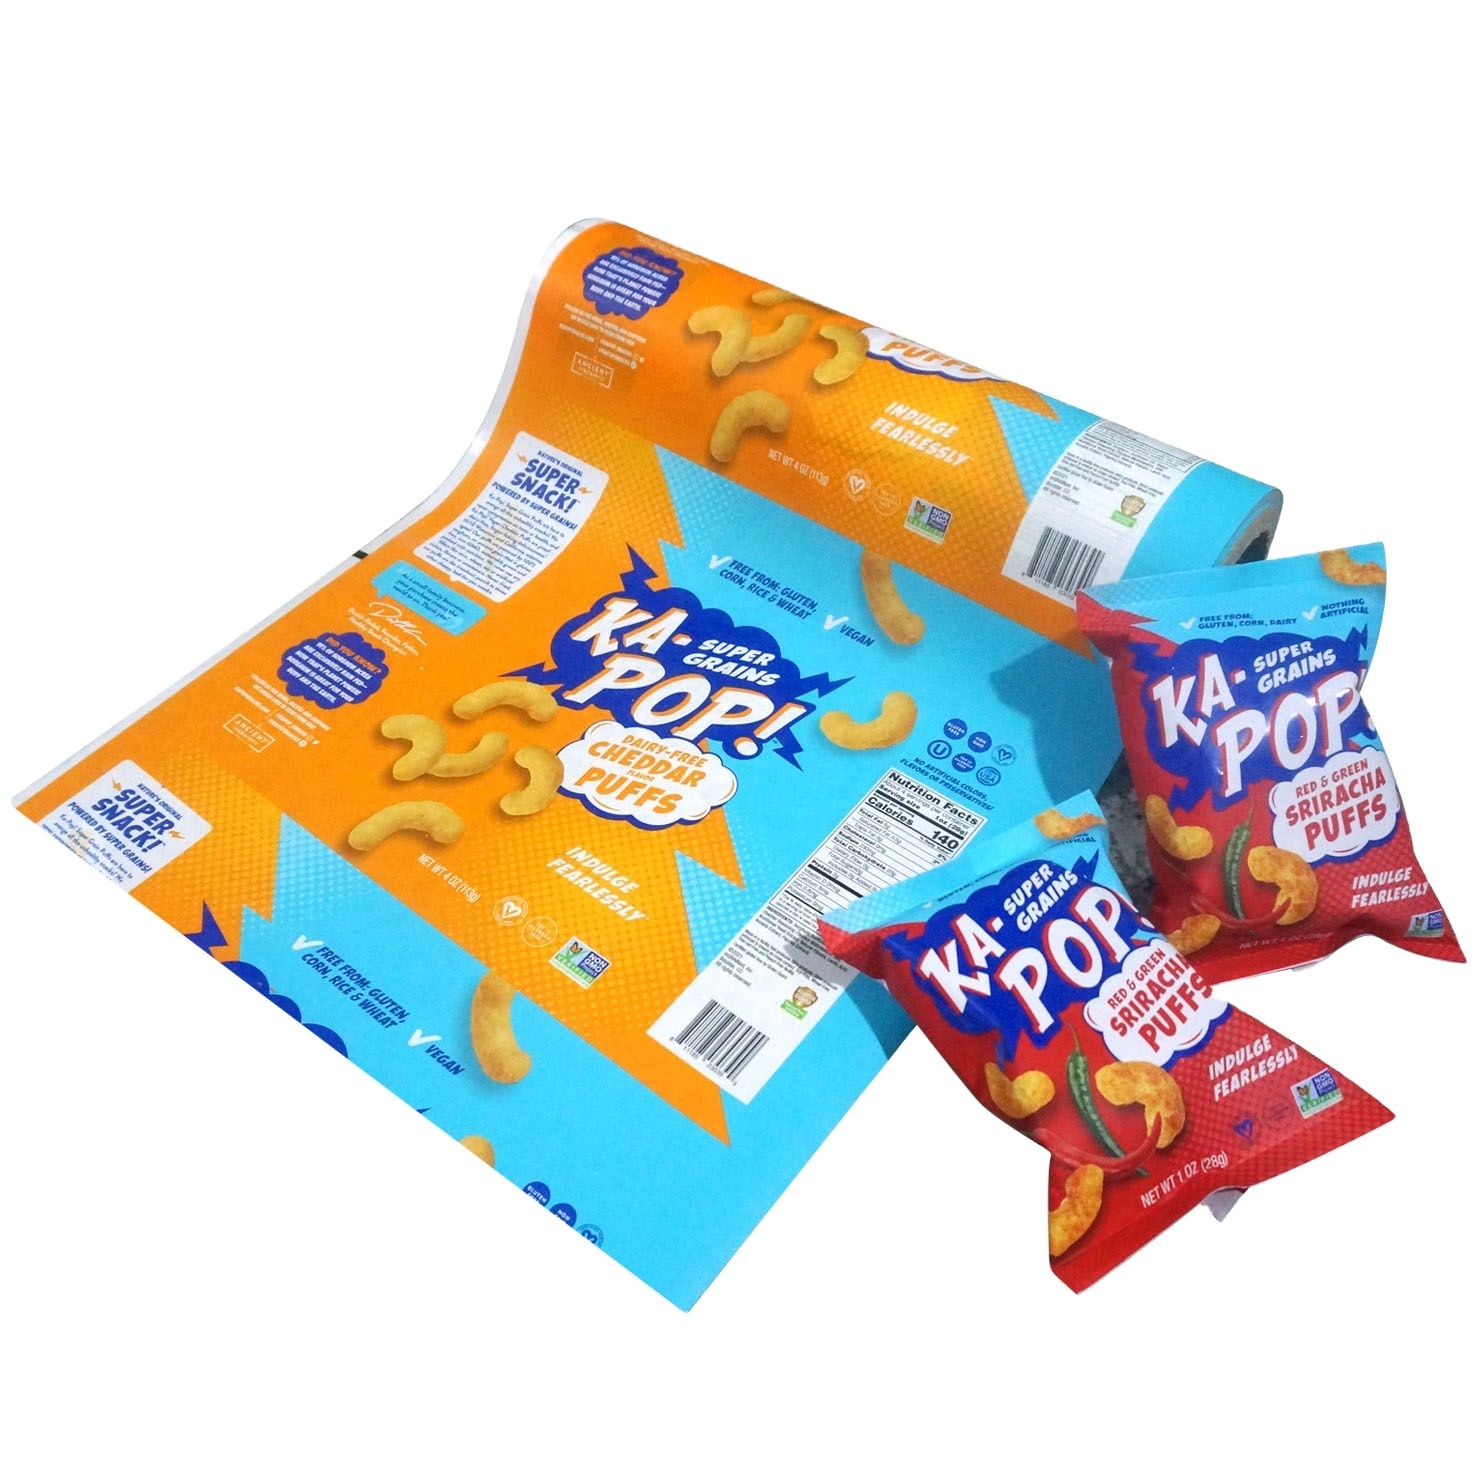 Biscutes/chips inflatable film plastic packaging BOPP film roll film